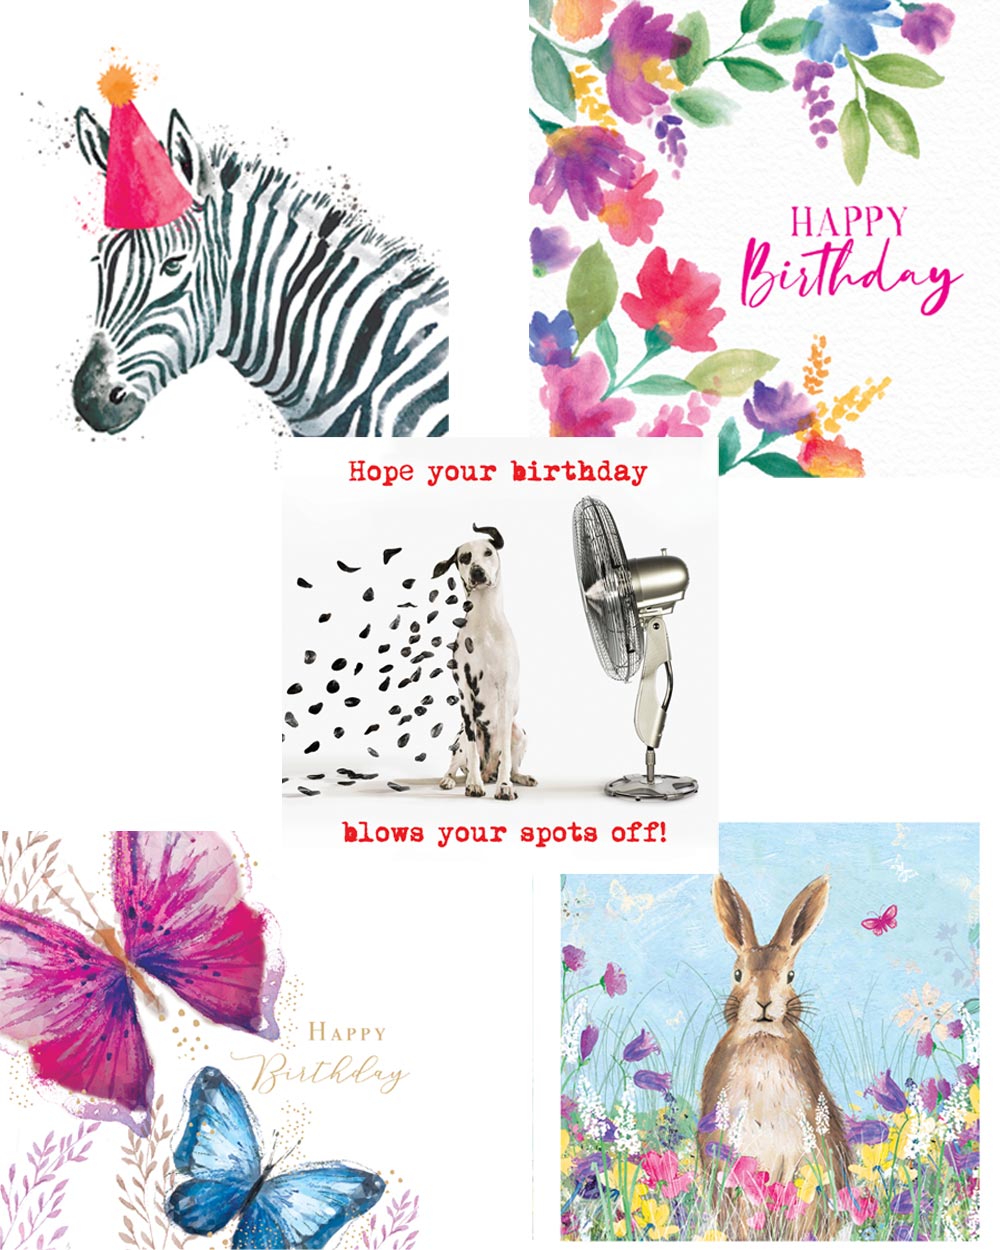 Get stocked up on charity birthday cards! With their assorted designs to suit different ages, this 5 pack of cards are ideal for anyone.  These cards are all made from FSC board which has also been carbon balanced. A perfect purchase for the envionmentally conscious!